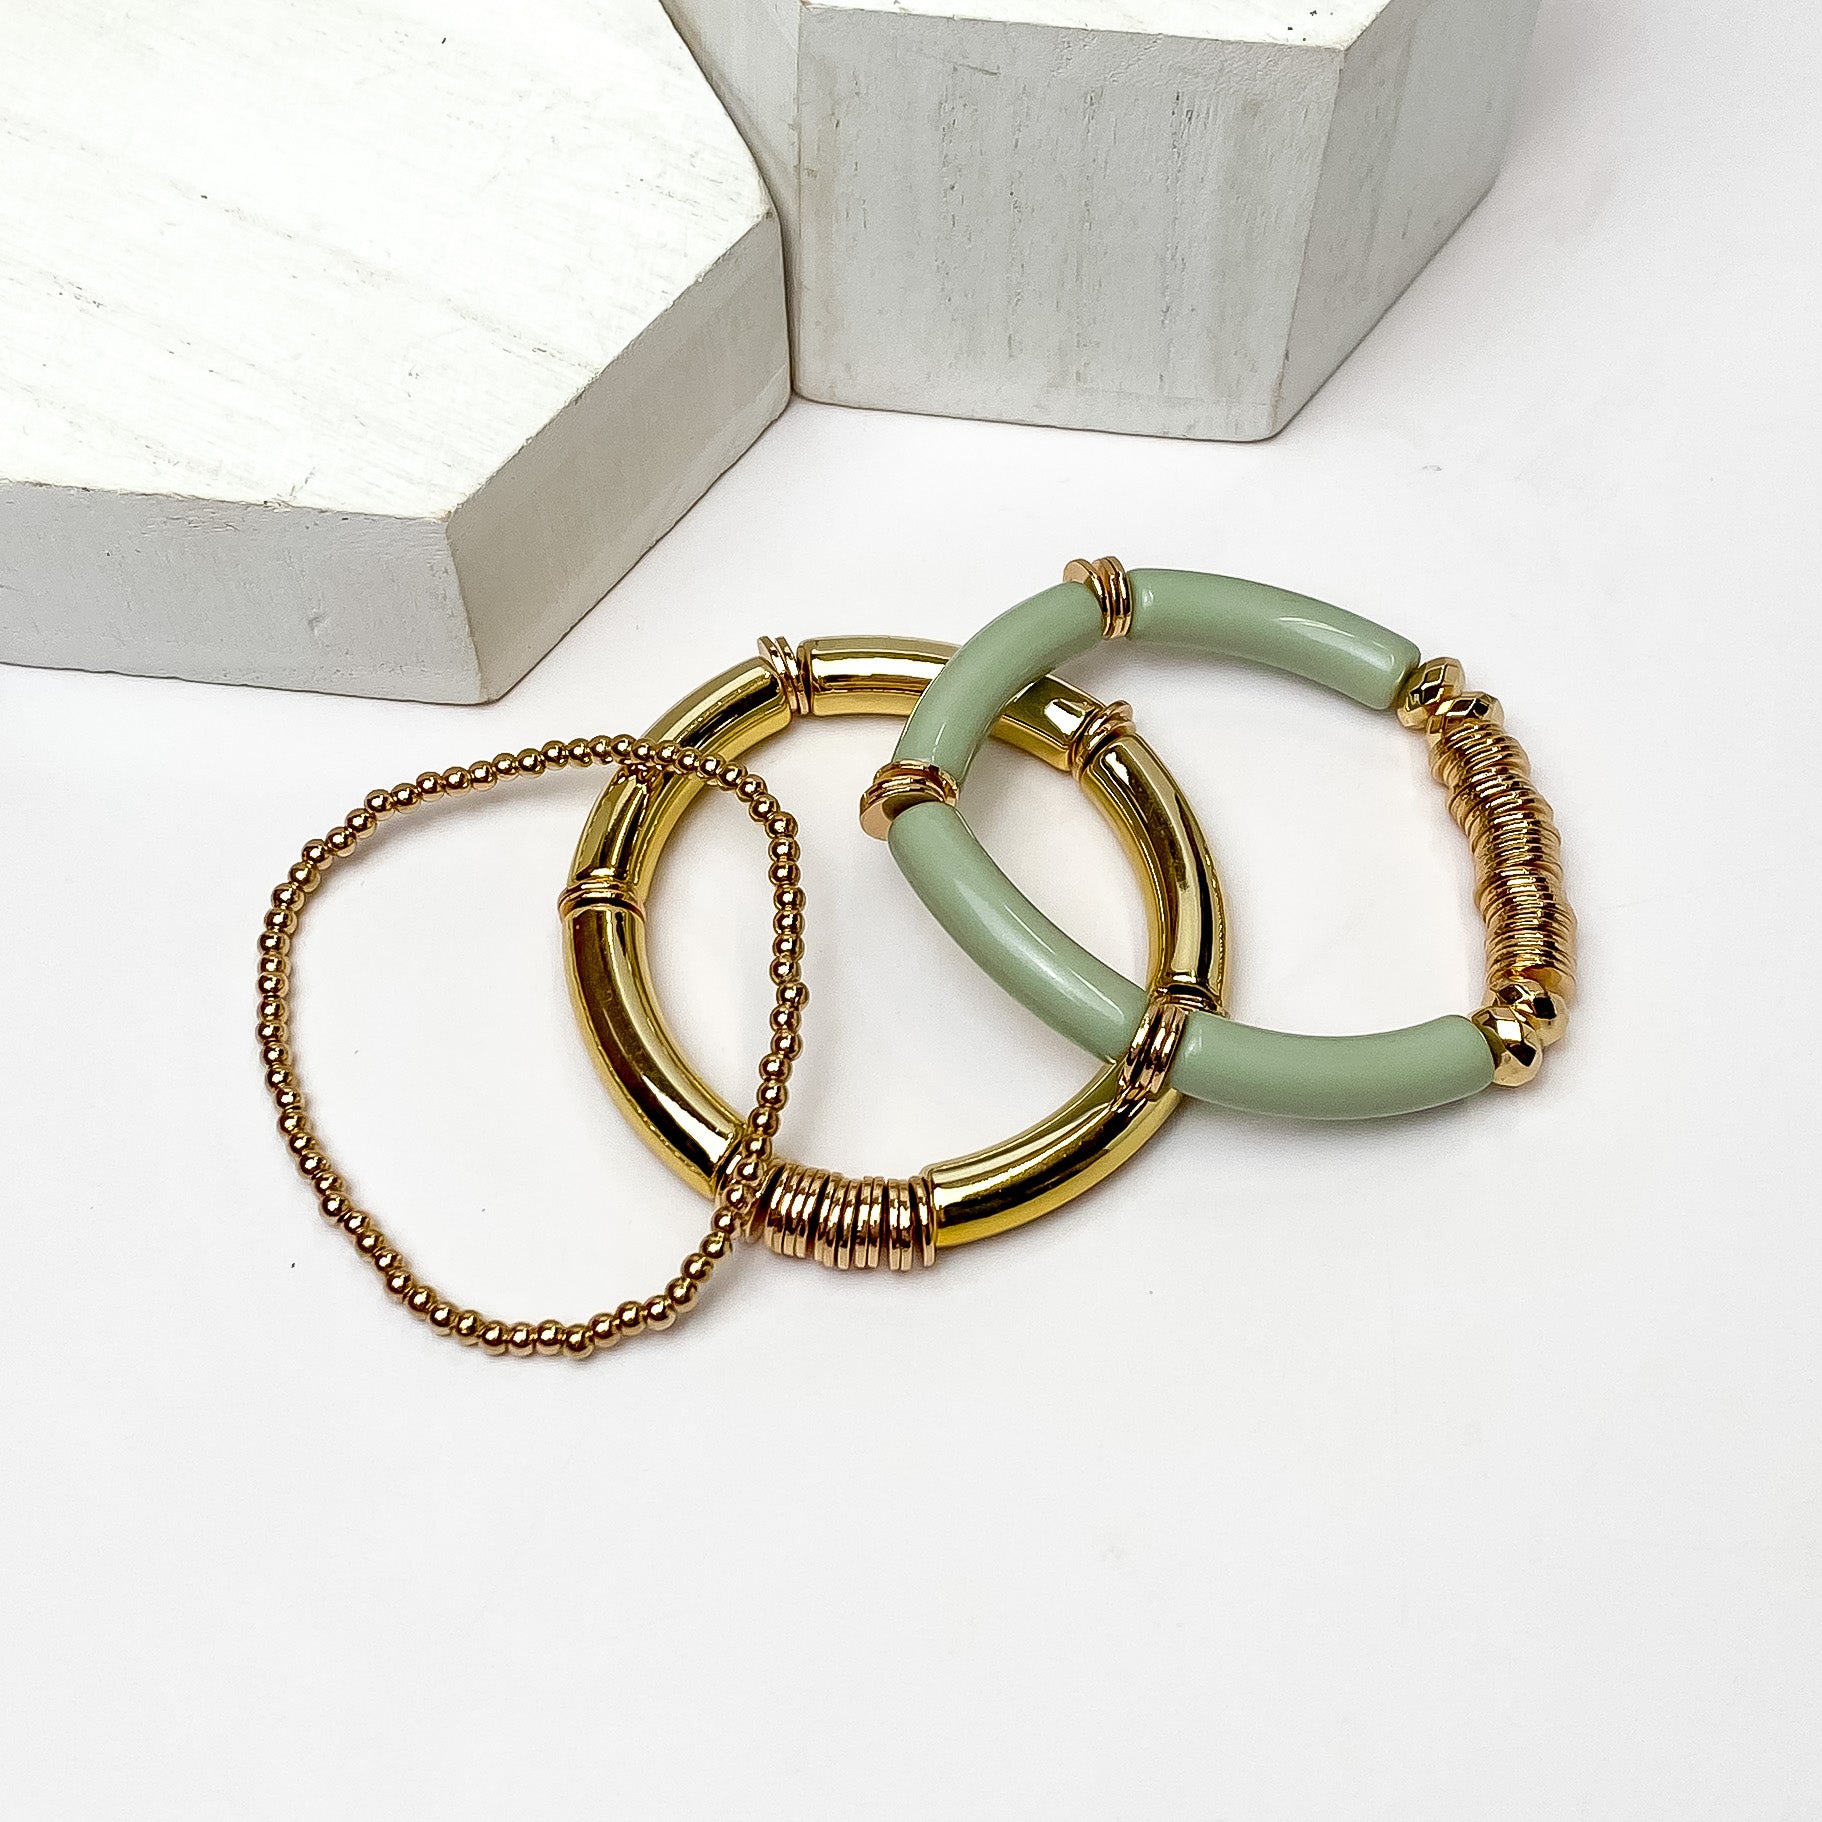 Set of Three | Bahama Nights Gold Tone Tube Bracelet Set in sage green. Pictured on a white background with white platforms above the bracelets. 